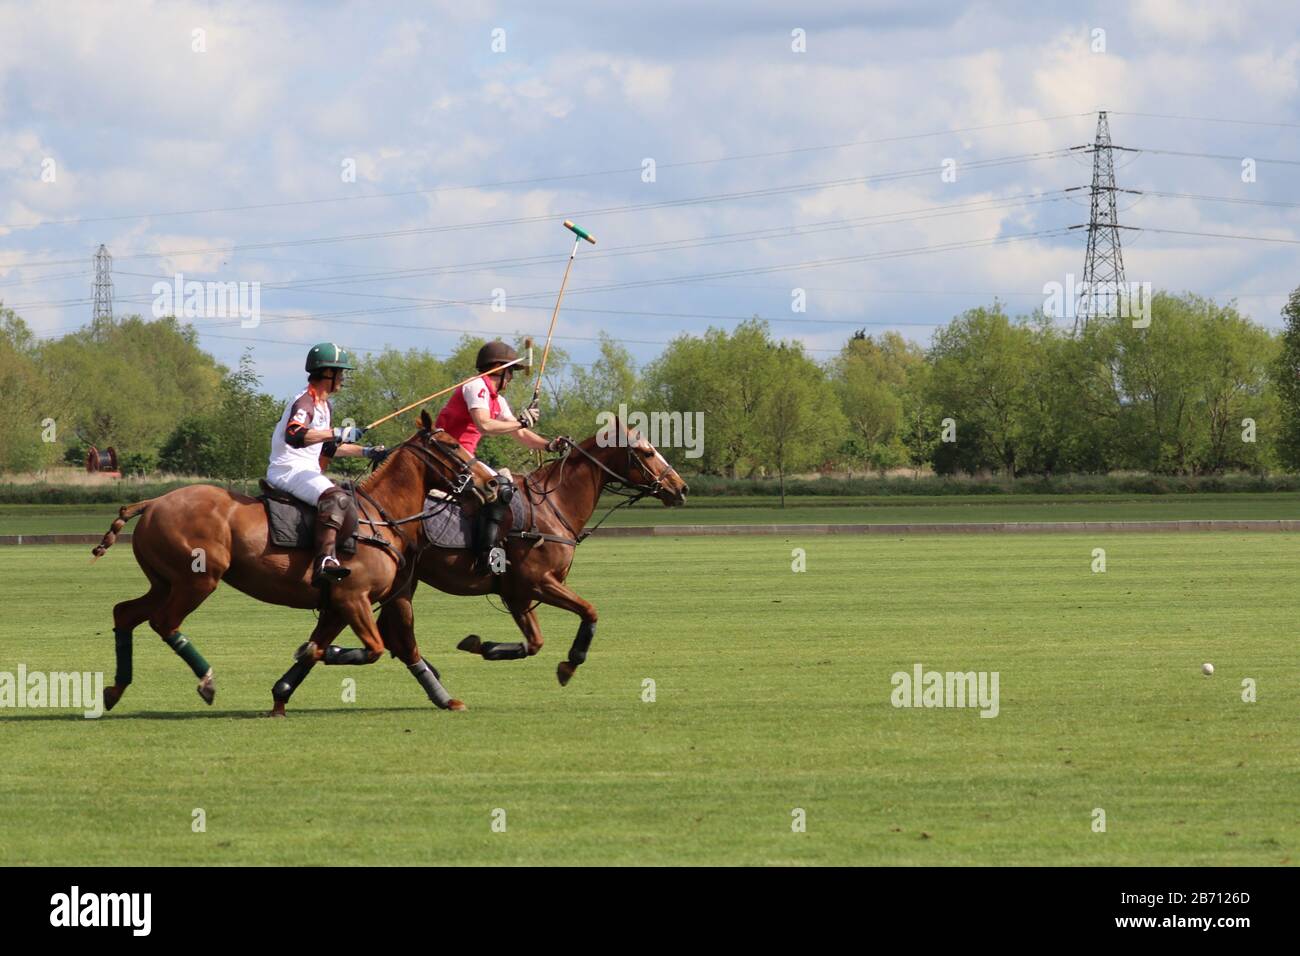 Players battle for the ball during polo tournament Stock Photo